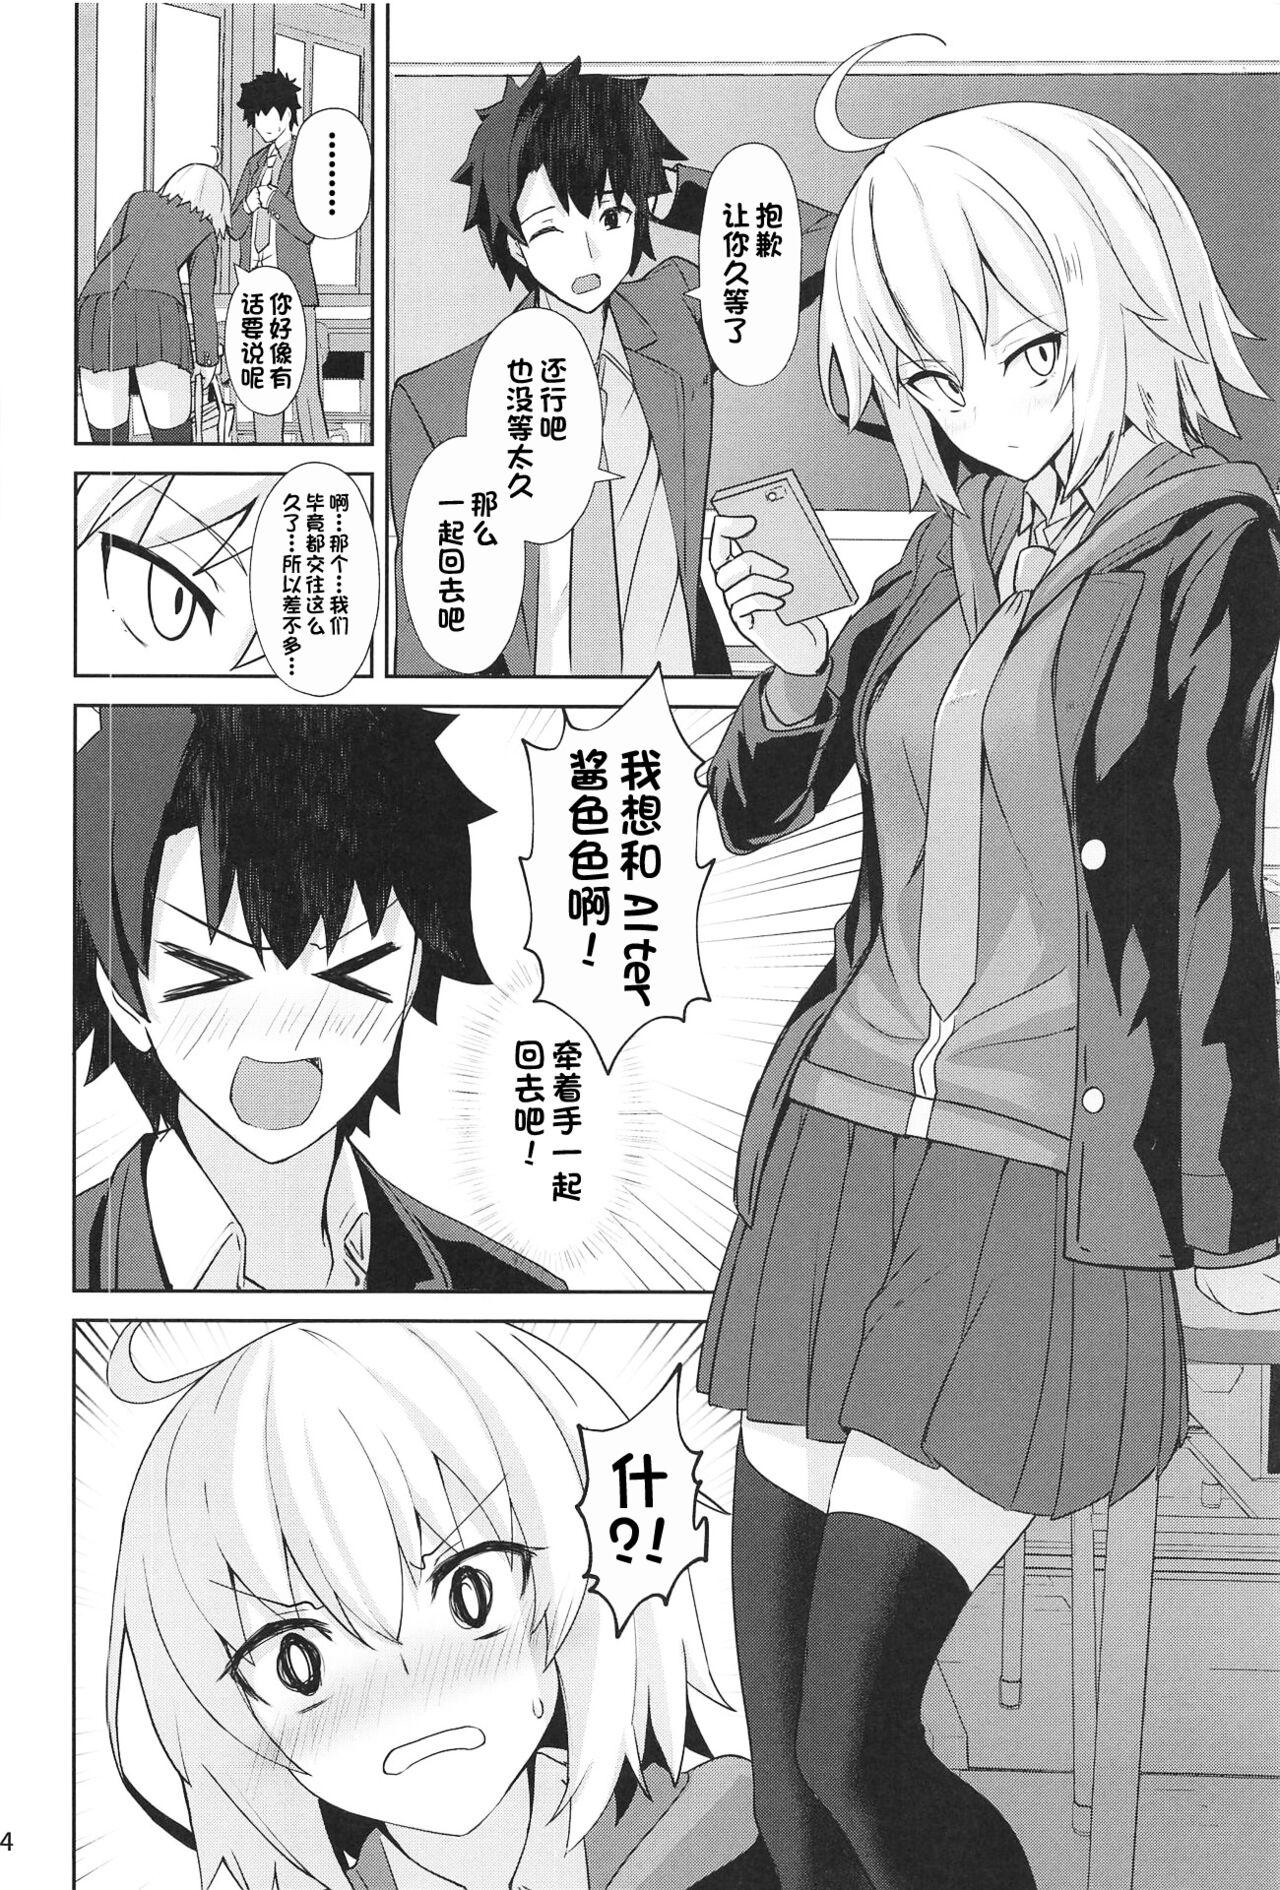 Red Head ときめきカルデア学園オルタナティ部 - Fate grand order Petite - Page 3